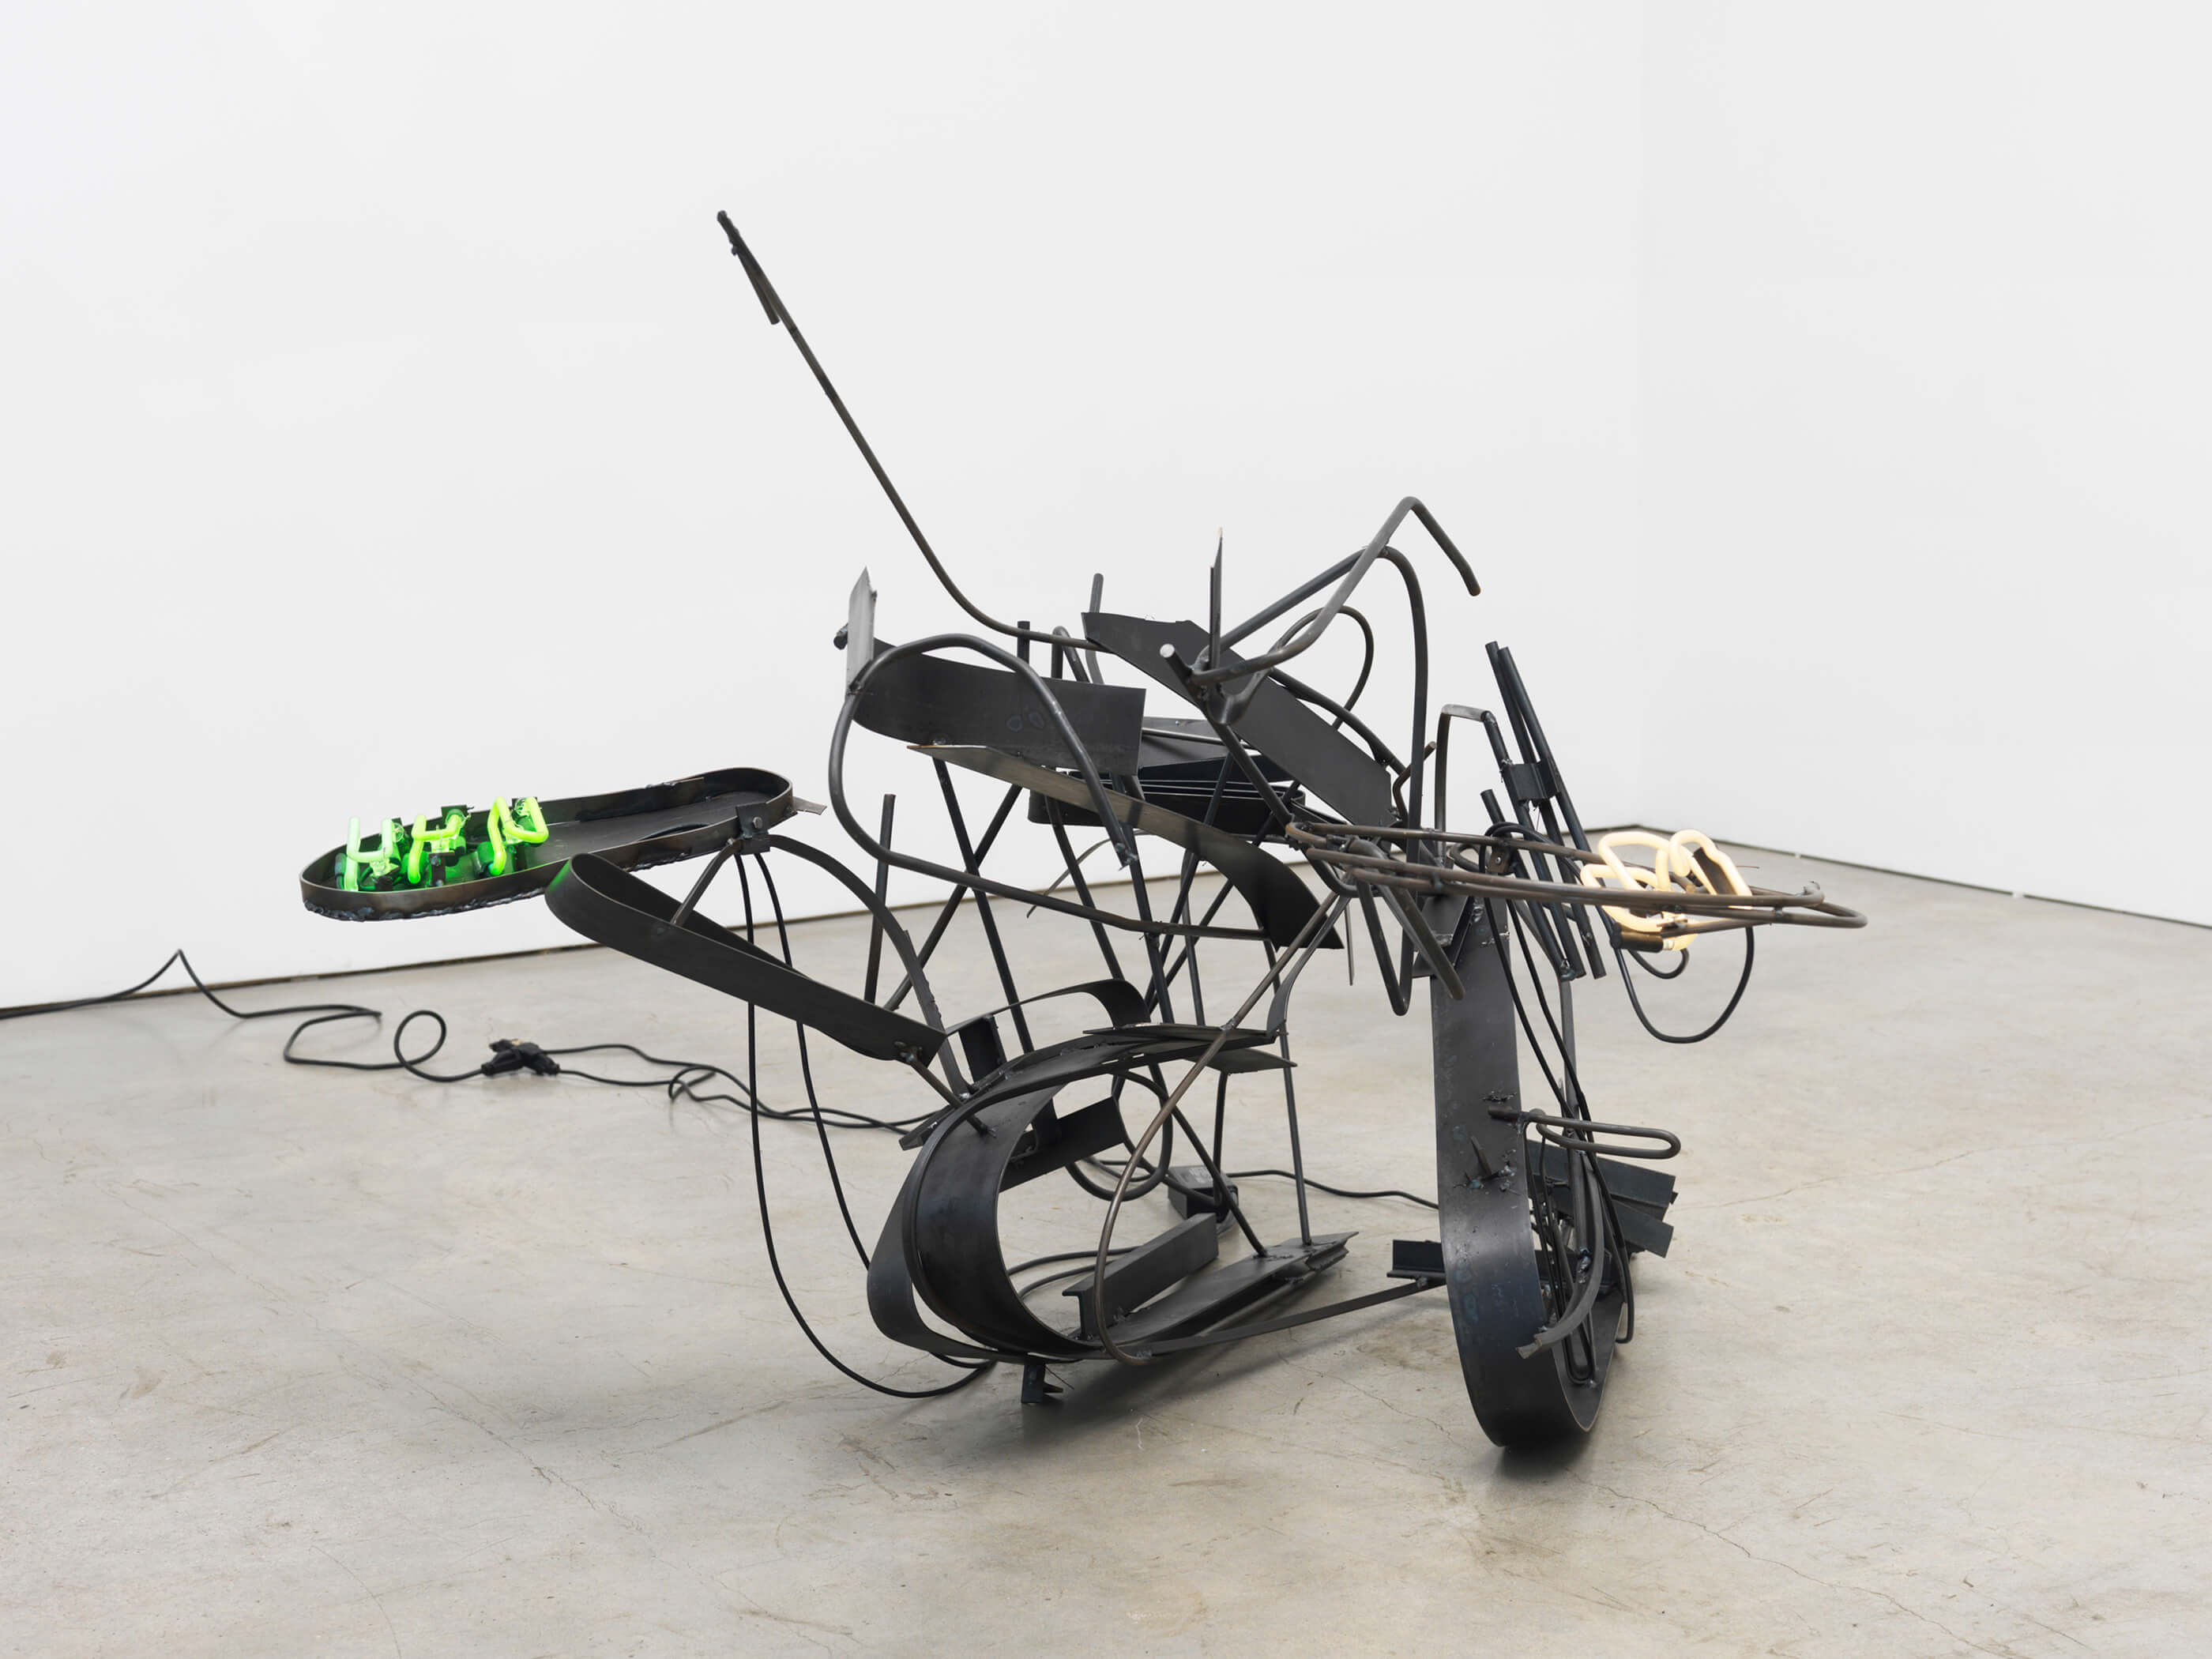 Hors d’oeuvres, Steel, neon, transformers, GTO cable, electric cable, 2 x 5 x 4.5 feet, 2015